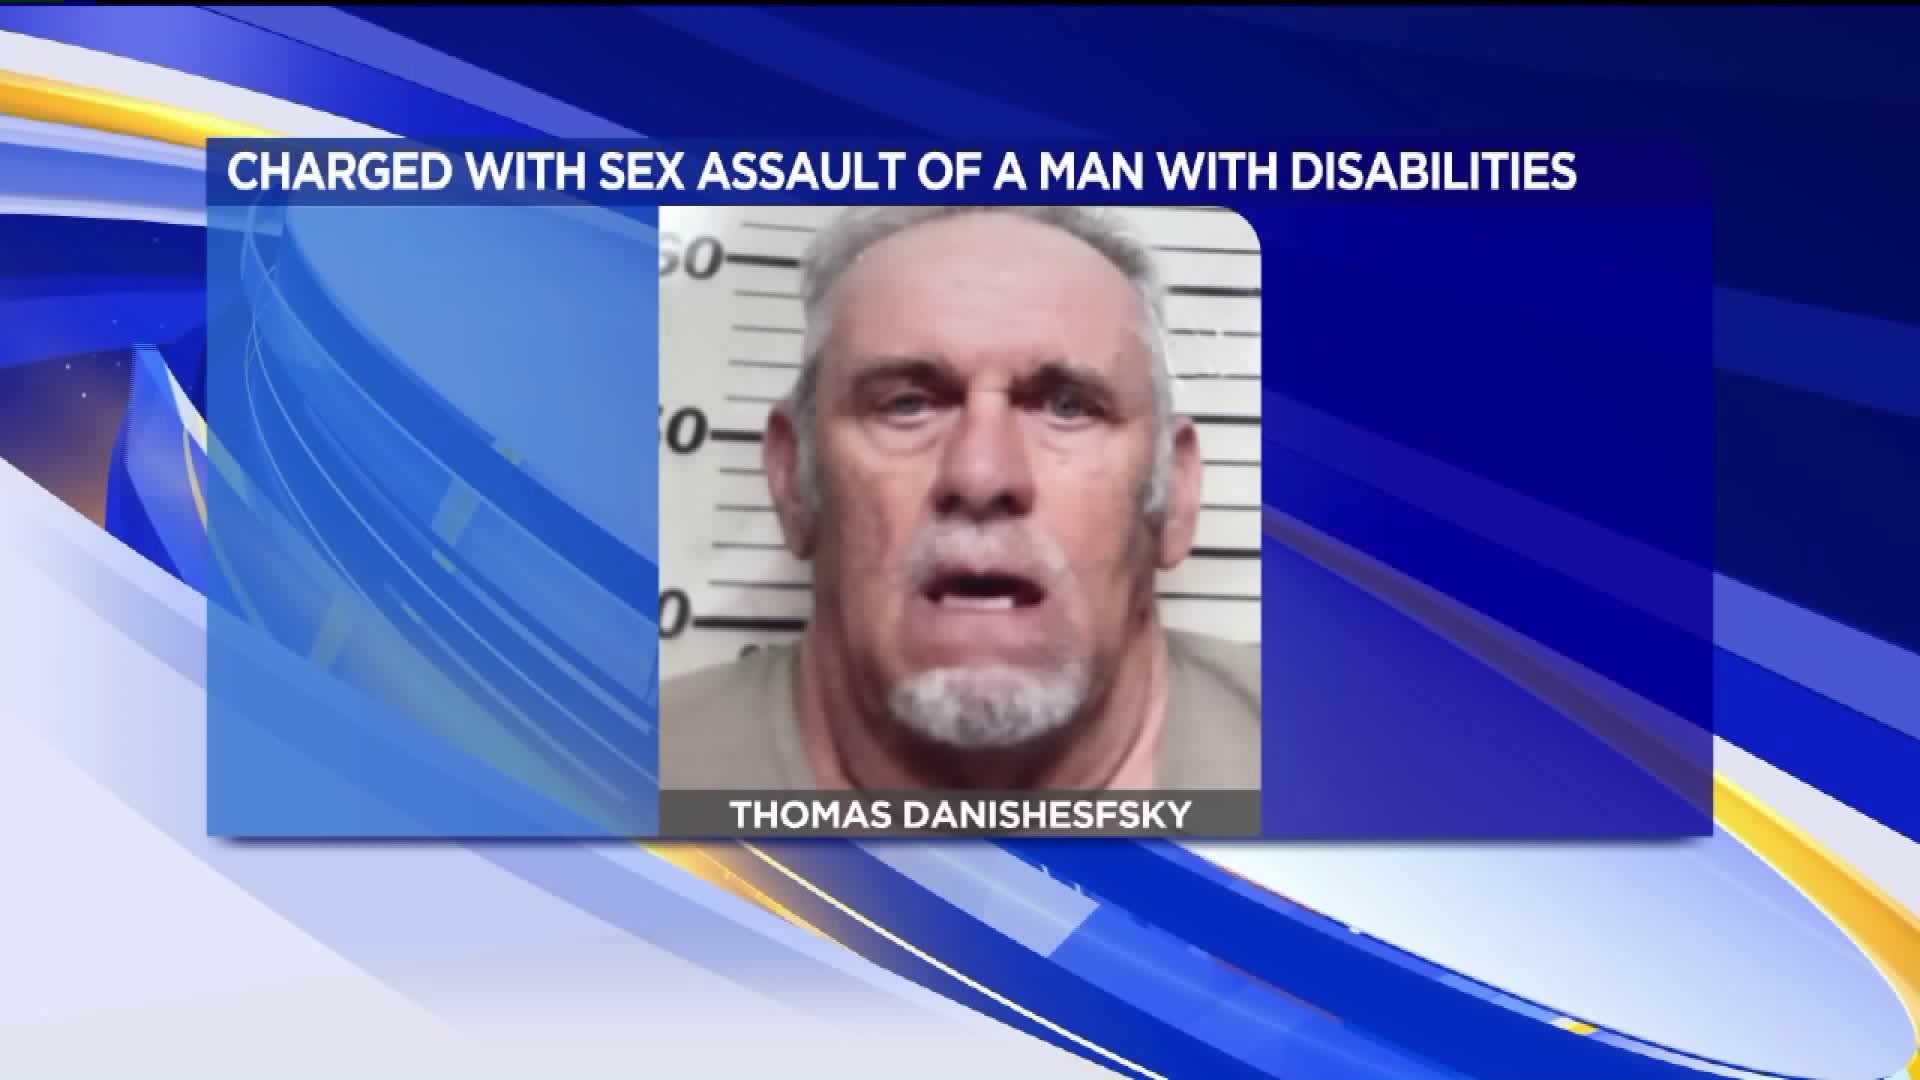 Man Accused Of Inappropriate Sexual Contact With Mentally Disabled Man